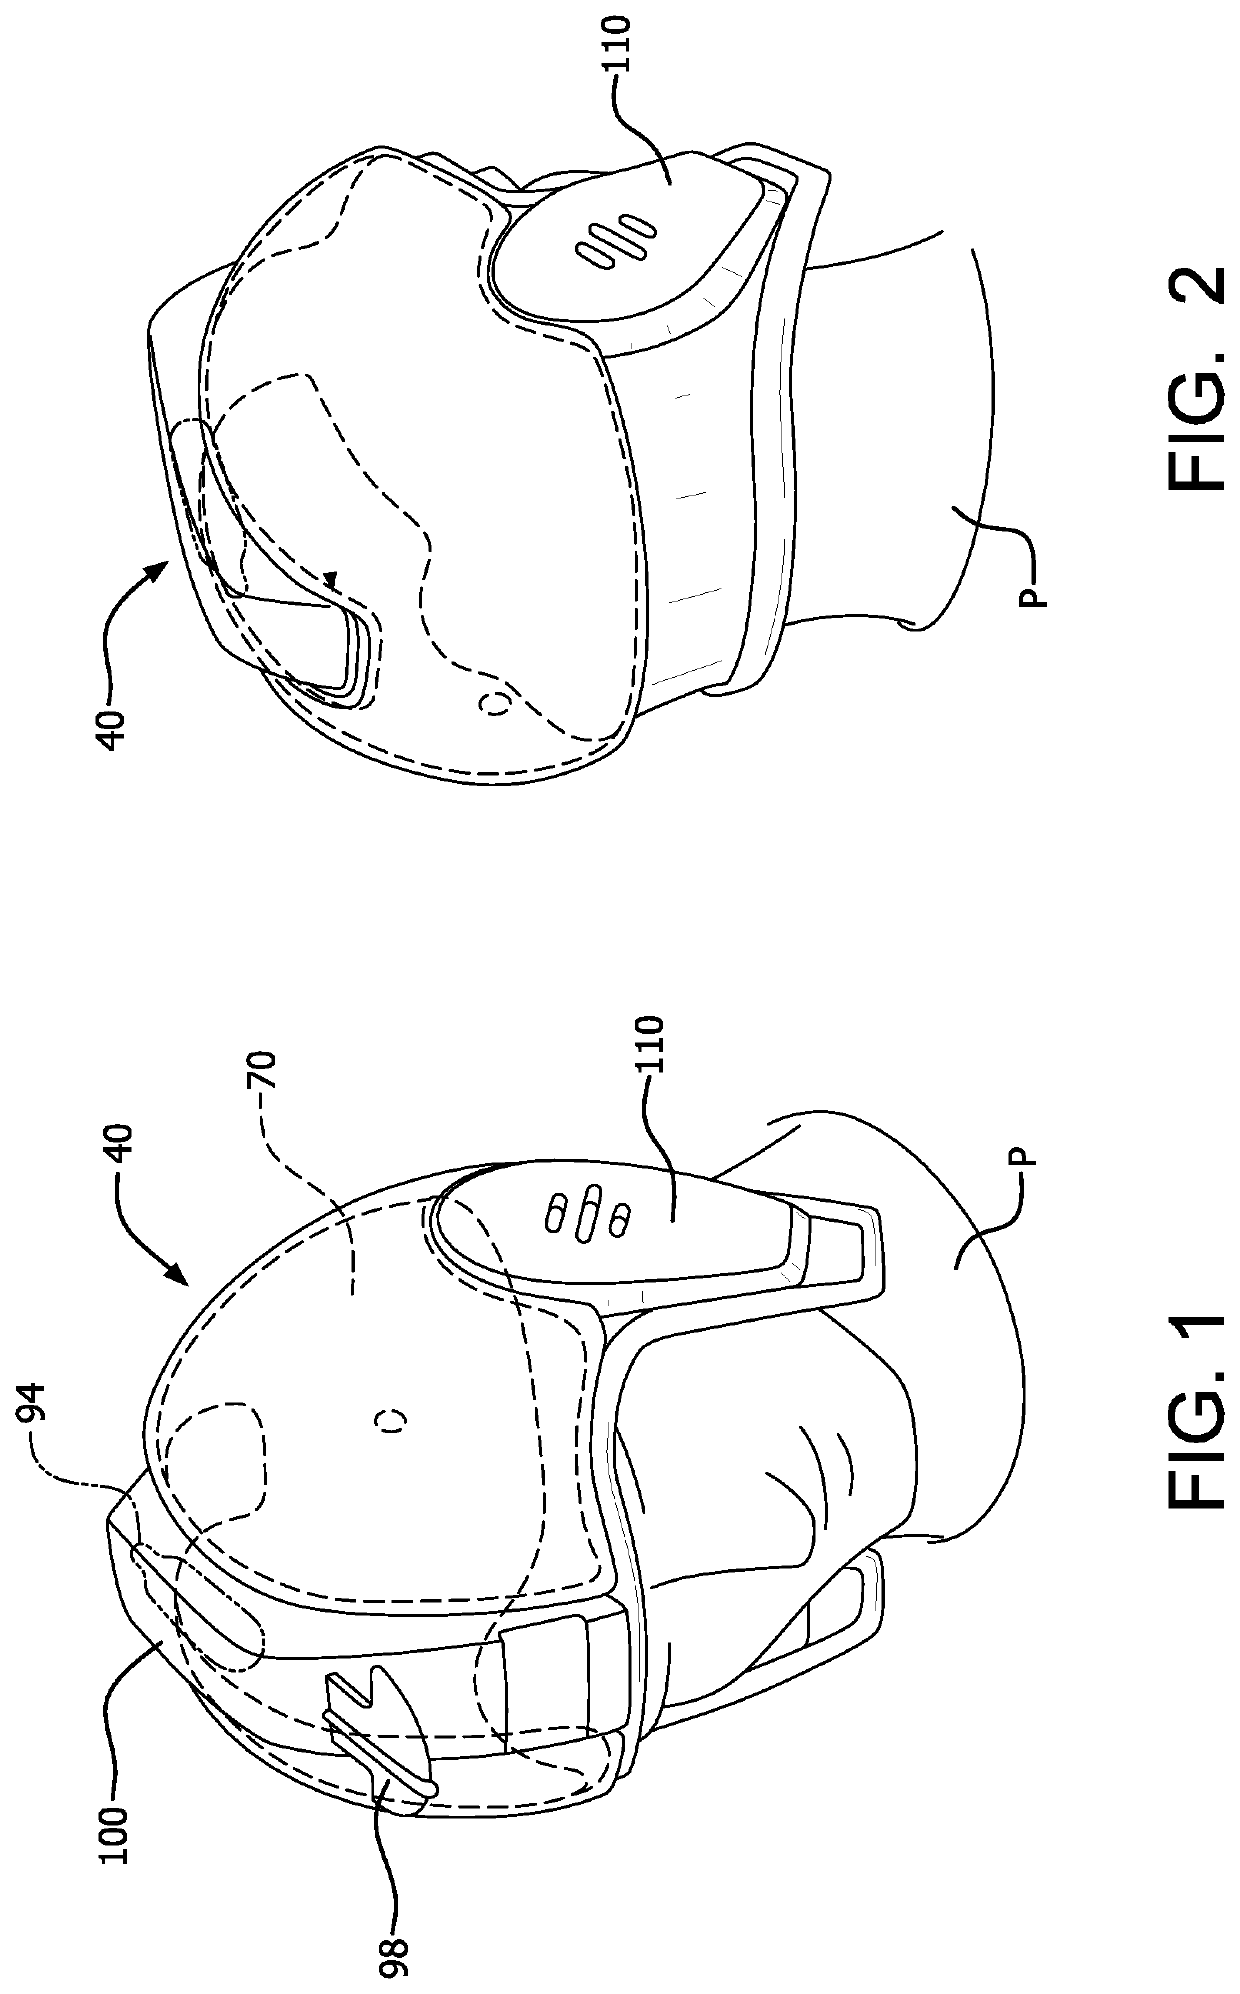 Portable thermal therapy and support apparatus for emergency medical treatment